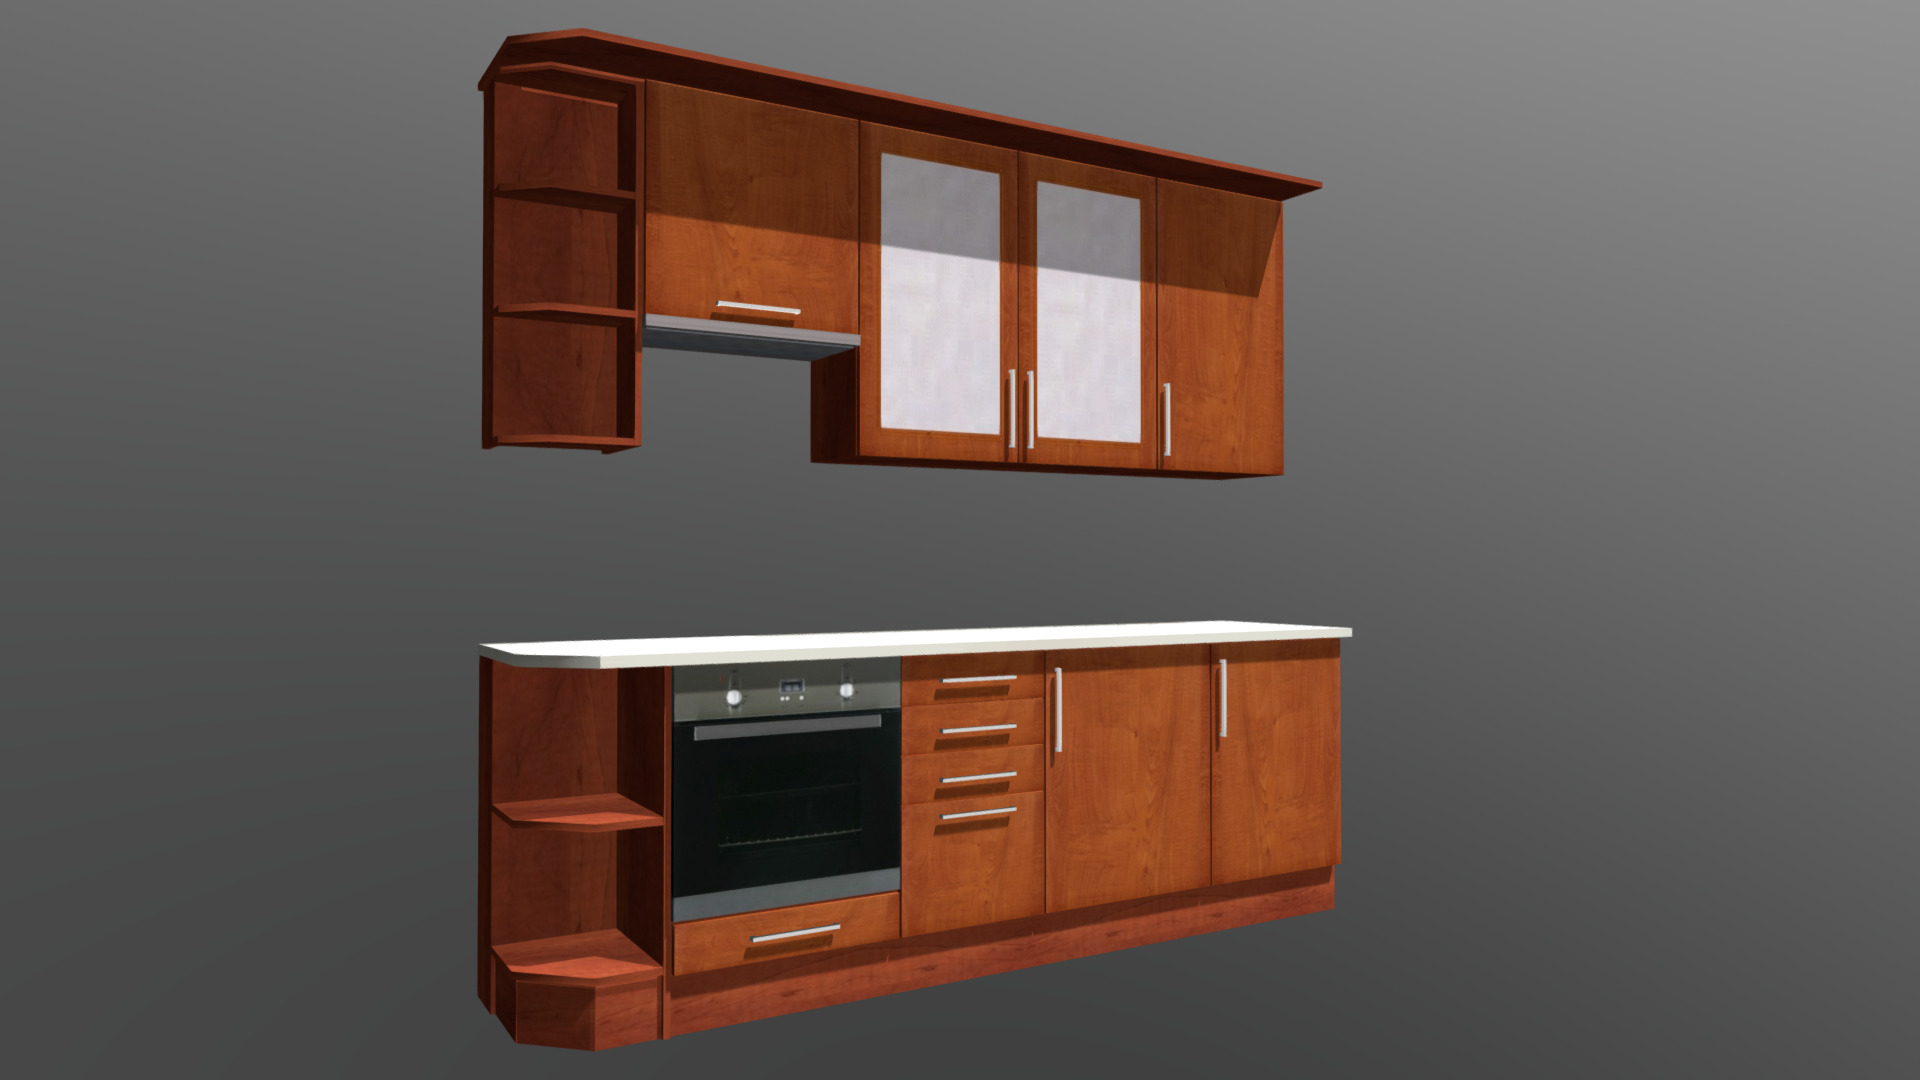 3D model Kitchen Cabinet 7 - This is a 3D model of the Kitchen Cabinet 7. The 3D model is about a kitchen with a wood cabinet.